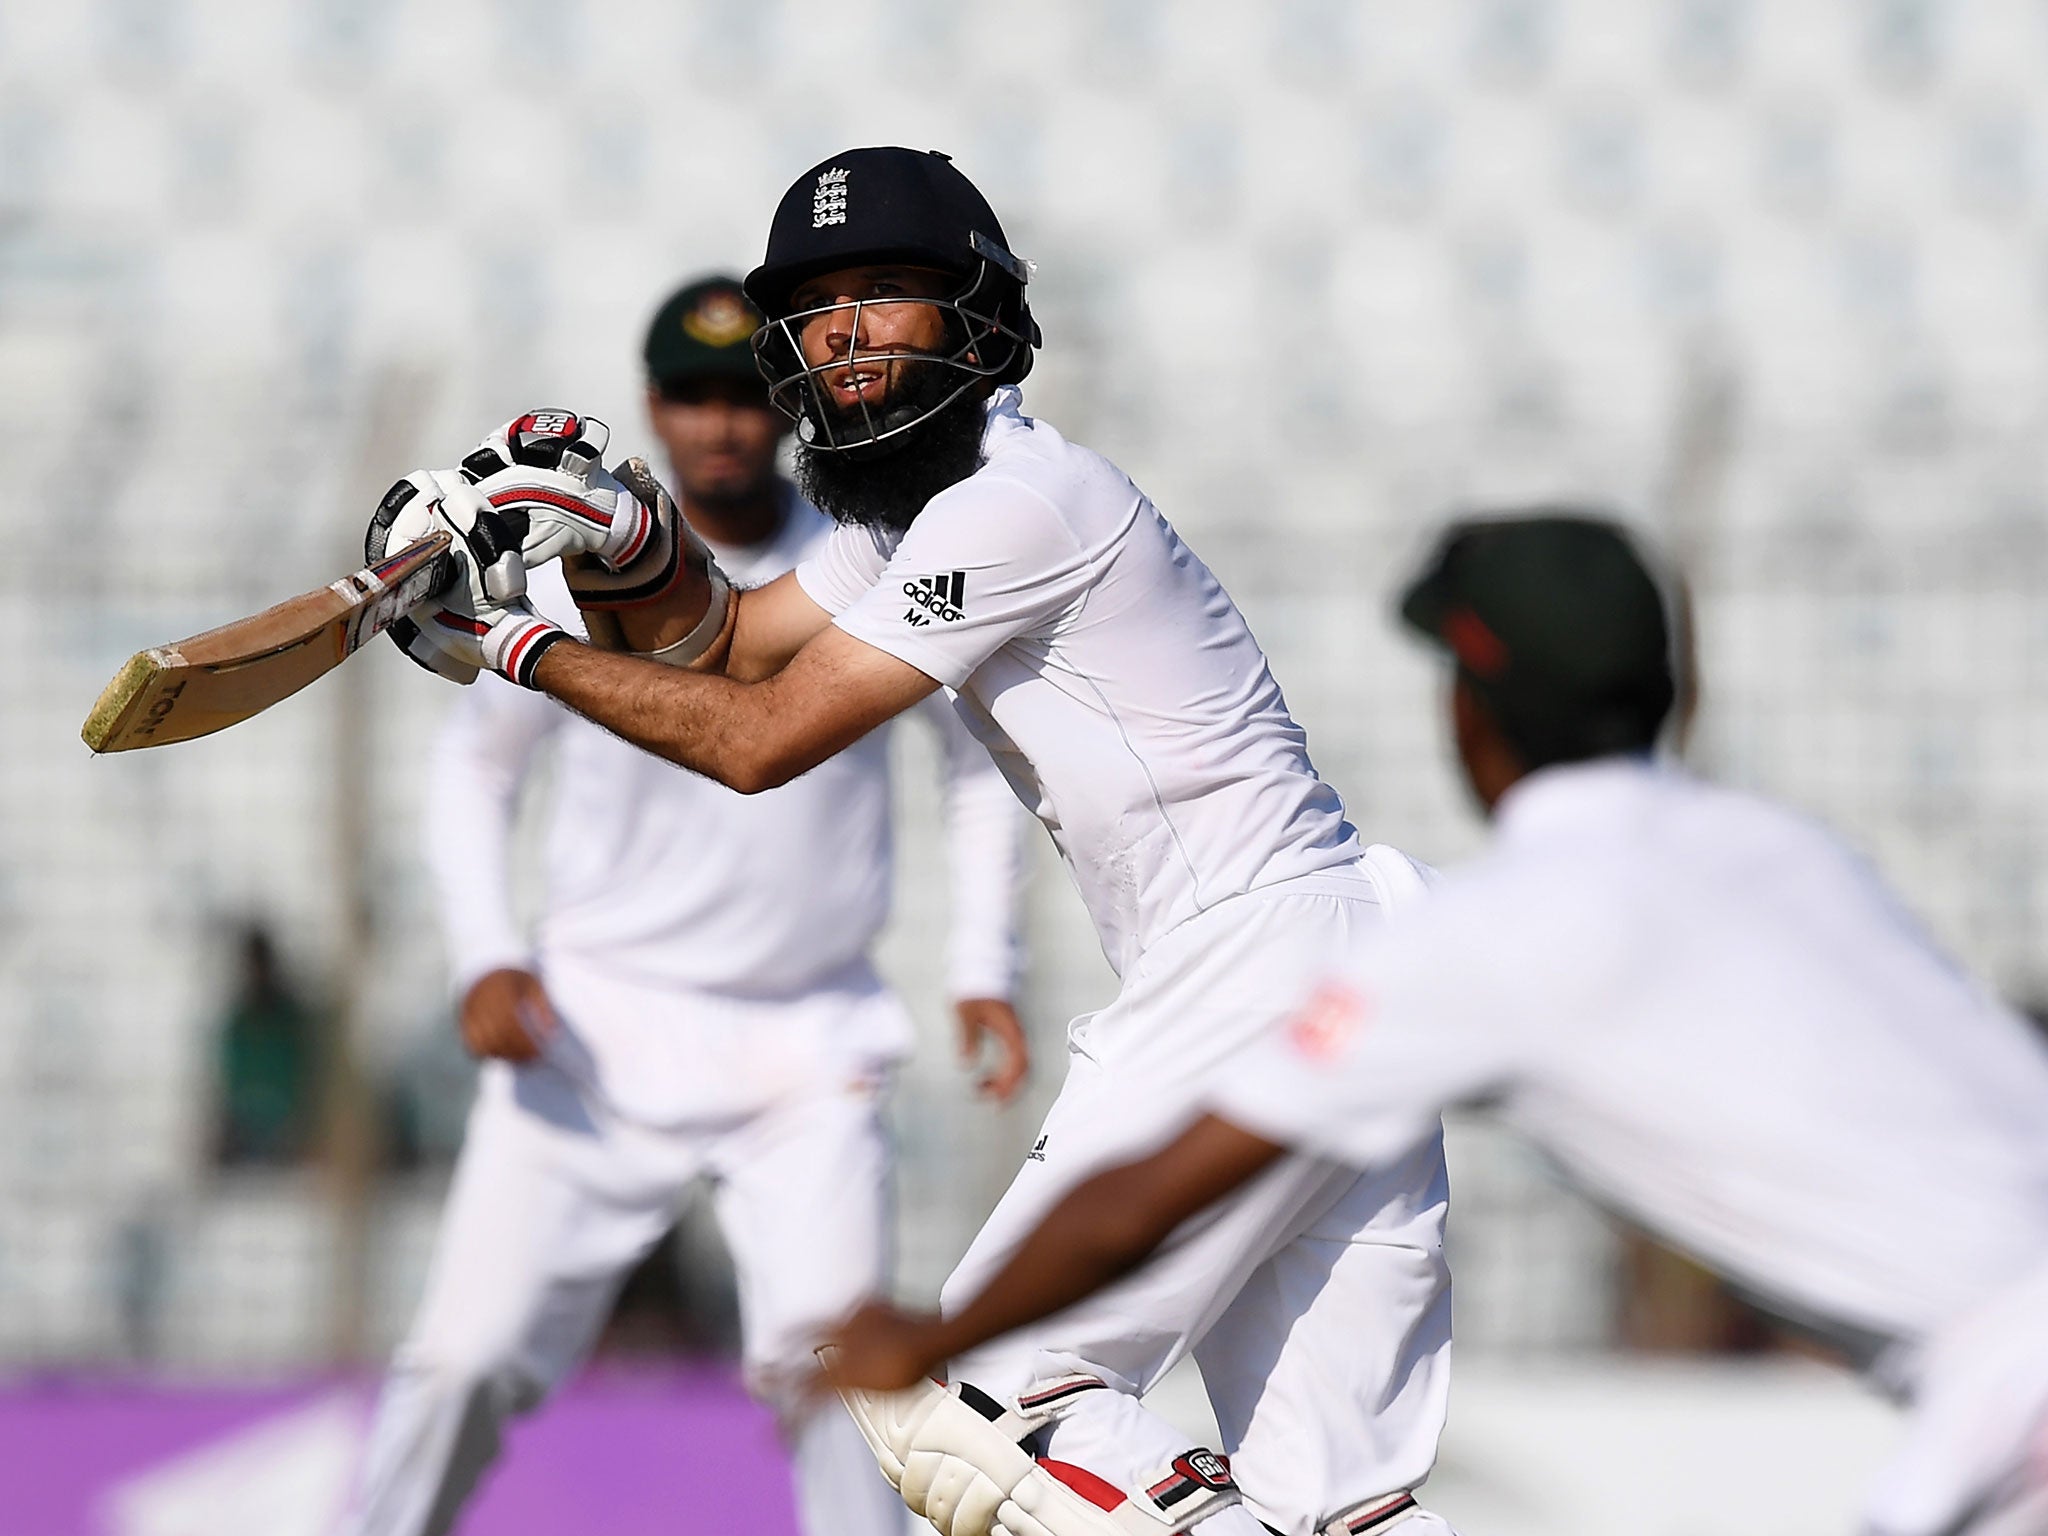 Moeen Ali plays a shot during the first day of the first Test match between Bangladesh and England at Zahur Ahmed Chowdhury Cricket Stadium